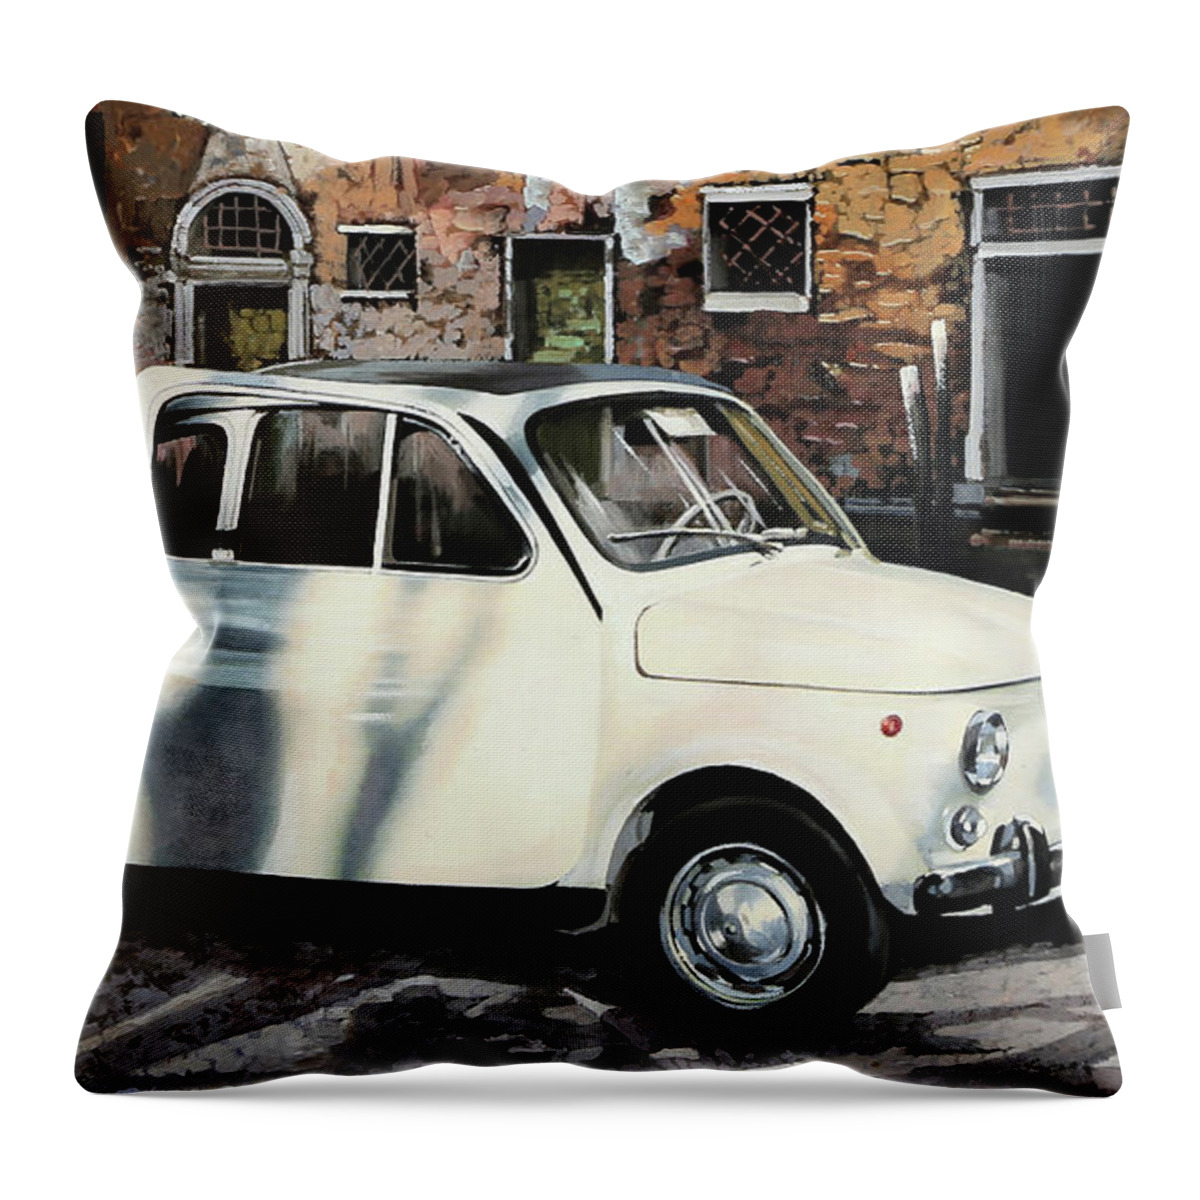 500 Throw Pillow featuring the painting 500 by Guido Borelli